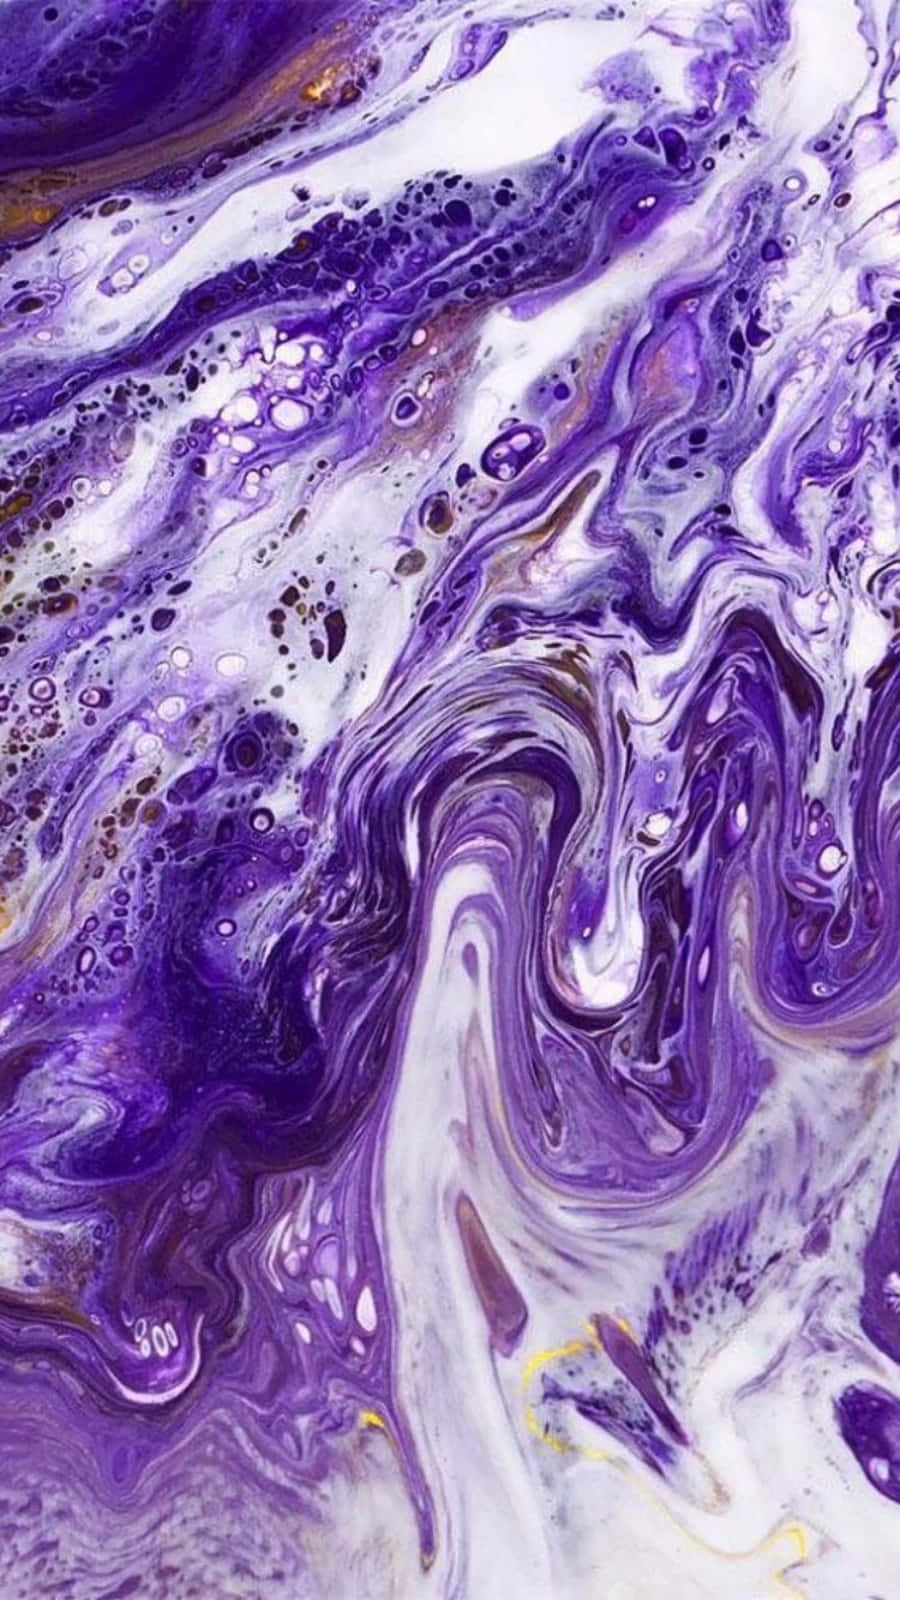 "Welcome to the mesmerizing world of Purple Marble!" Wallpaper